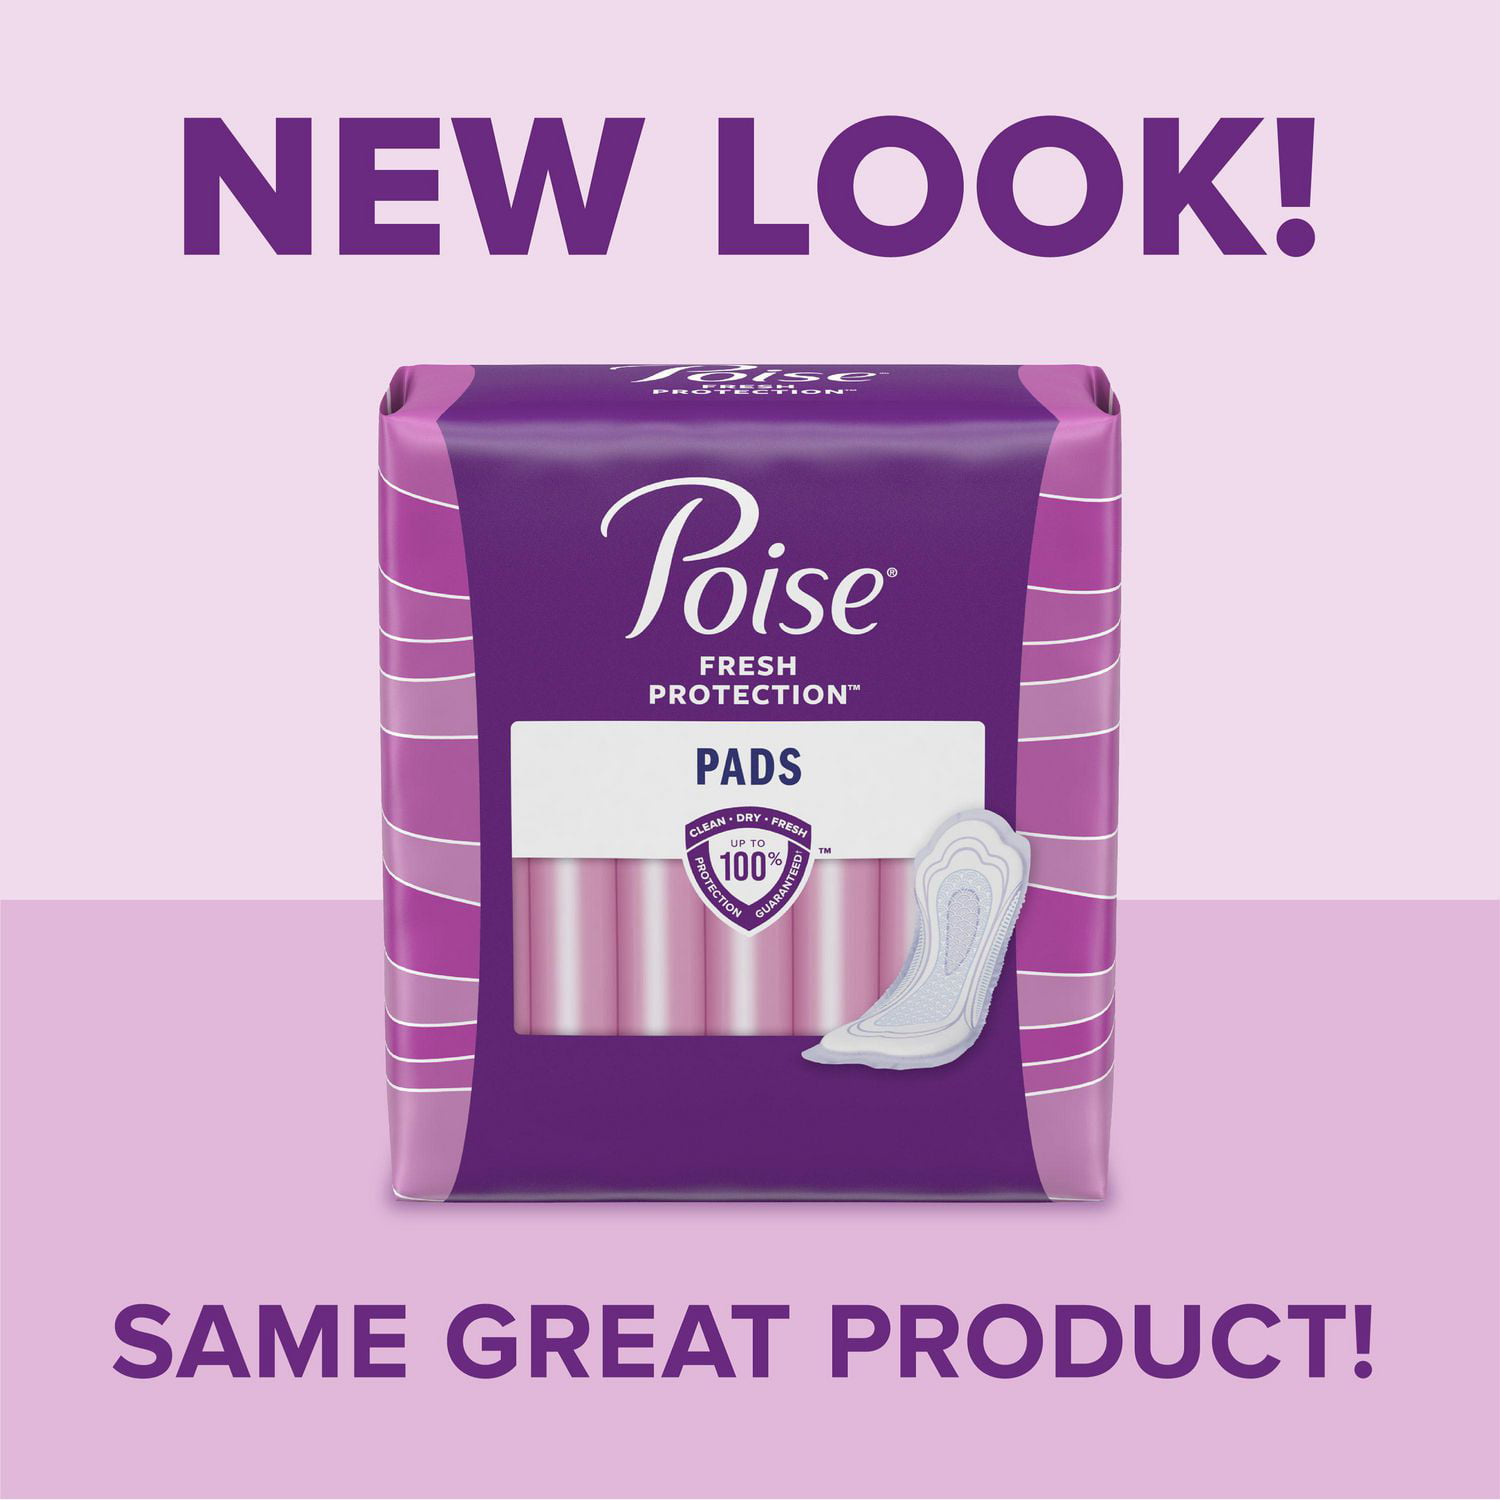 Buy Poise Pad Overnight 8 pack online at Cincotta Discount Chemist